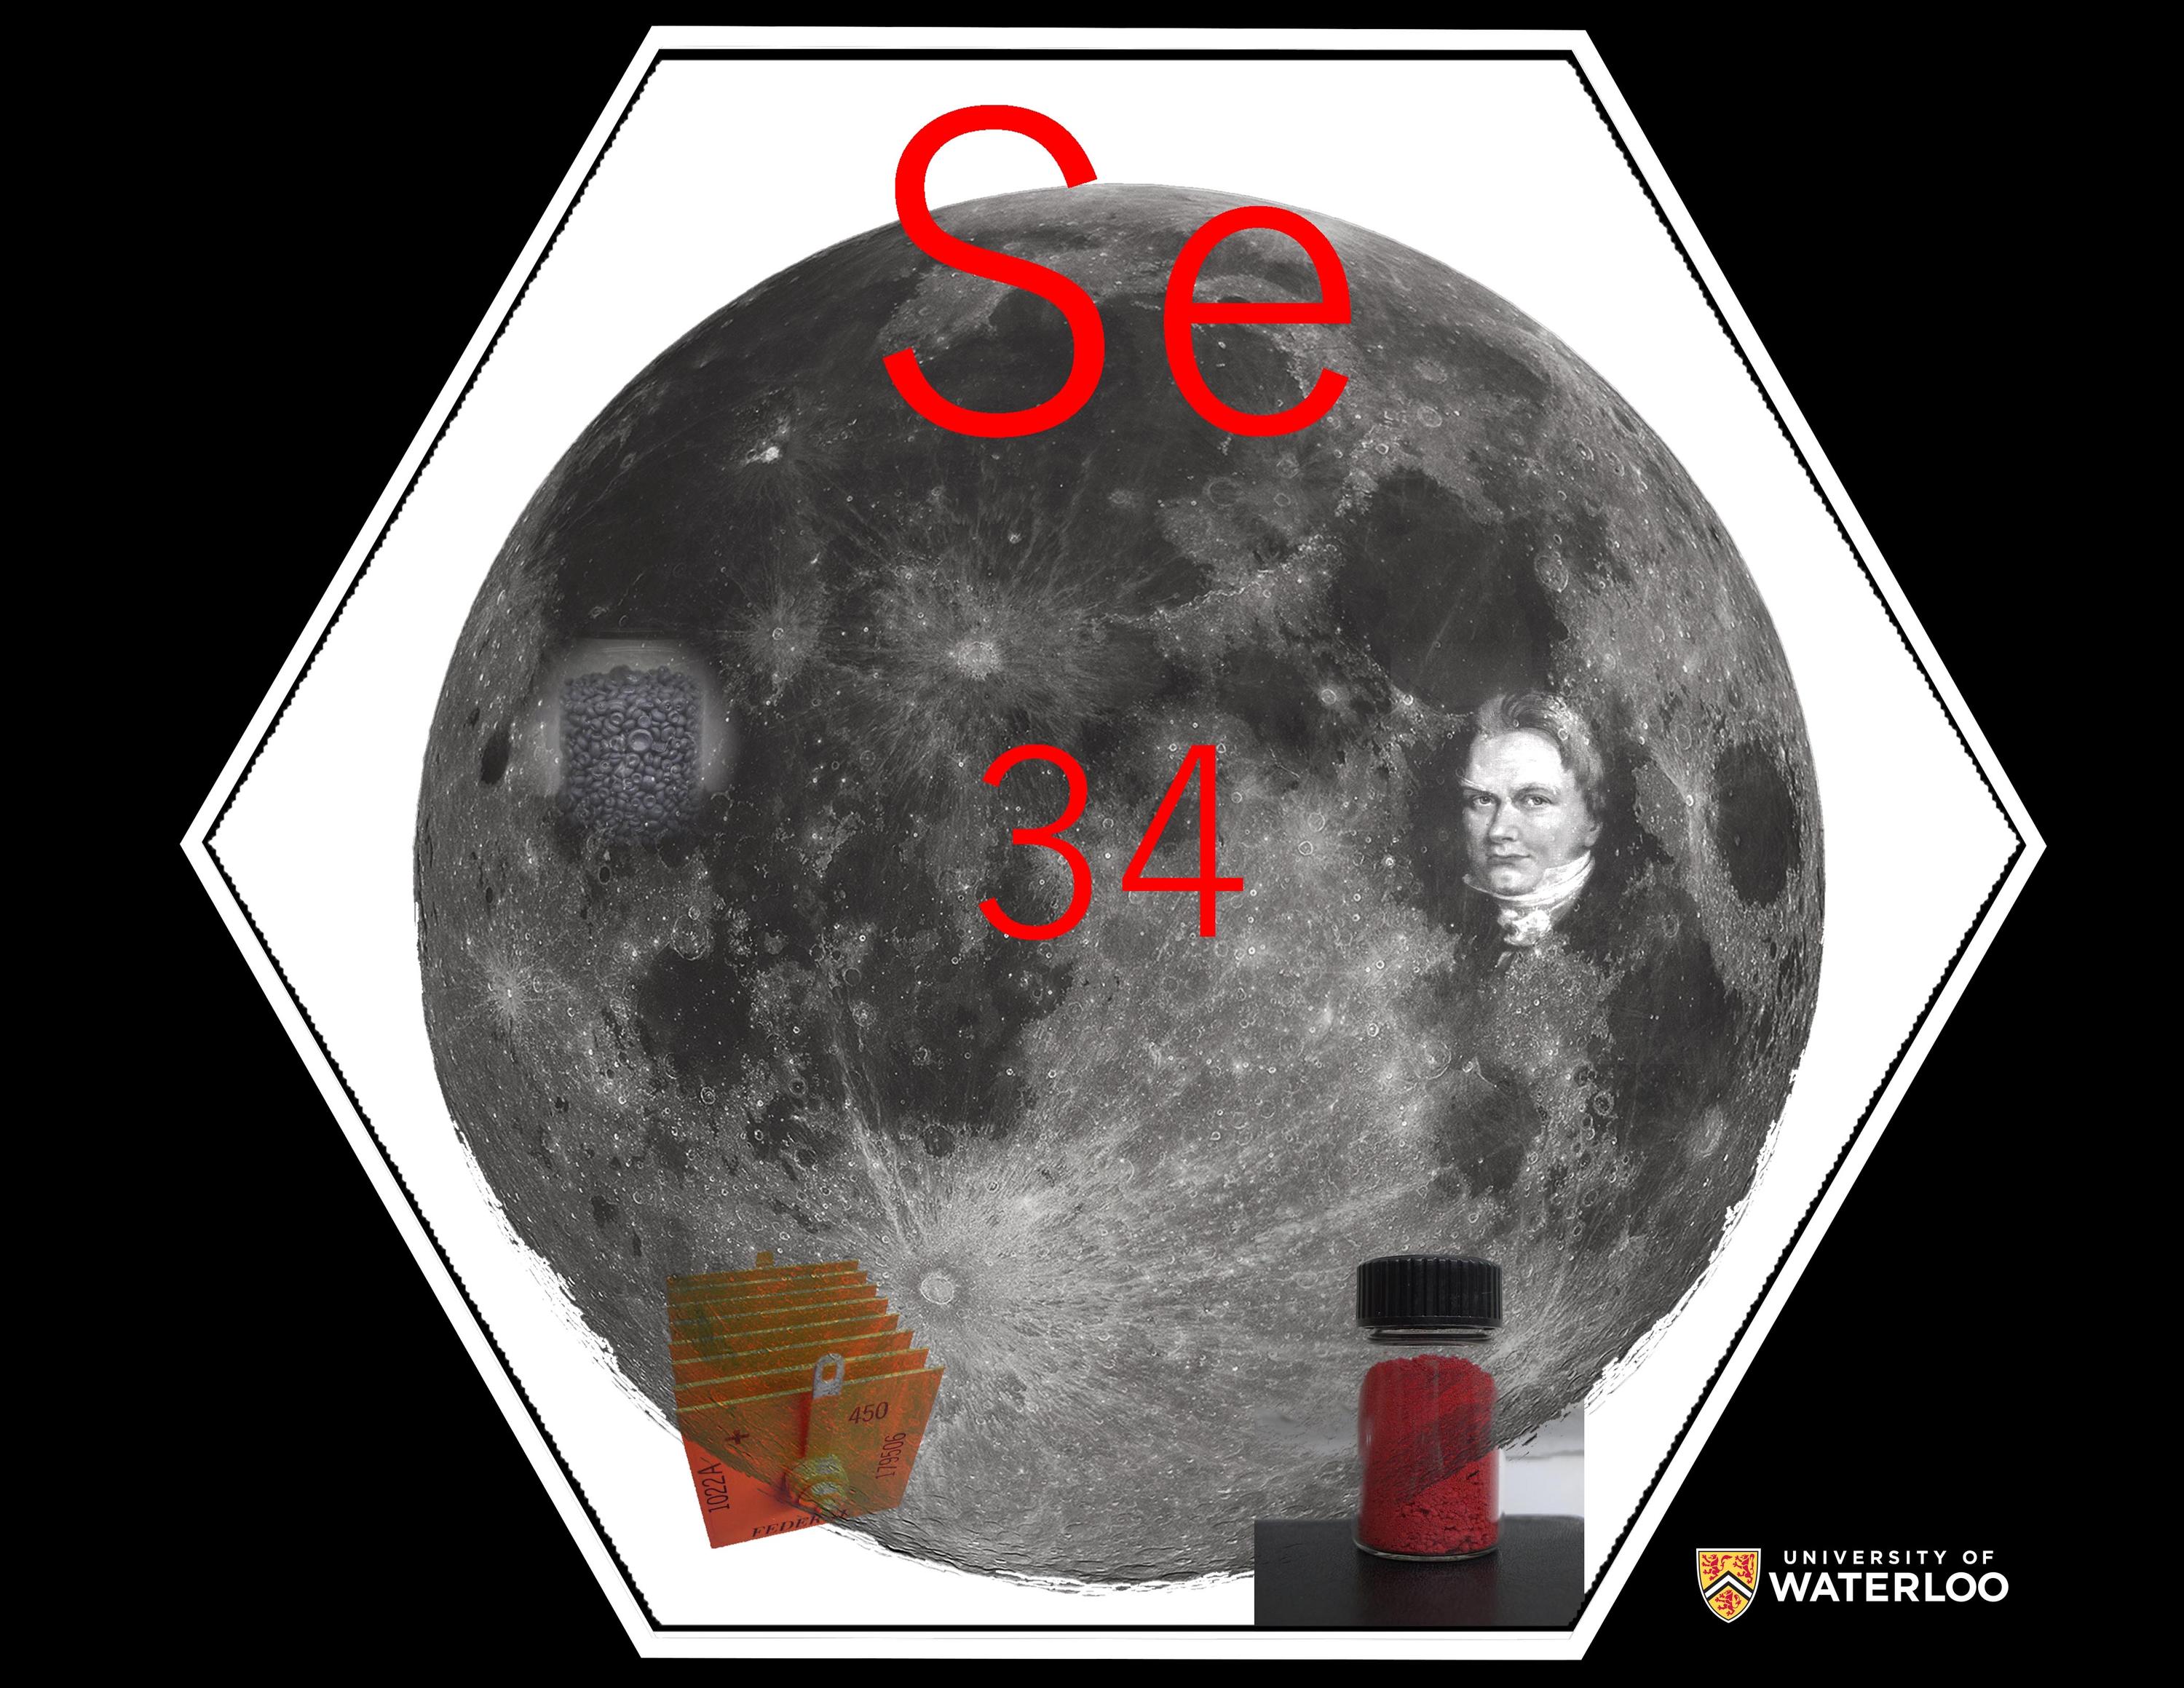 Digital composite. Chemical symbol “Se” is at the top with atomic number 34 centre, both in bright red. The background, which dominates the tile, is the full moon. Other images include portrait of Jöns Jacob Berzelius, a red glass vial, and a selenium rectifier.